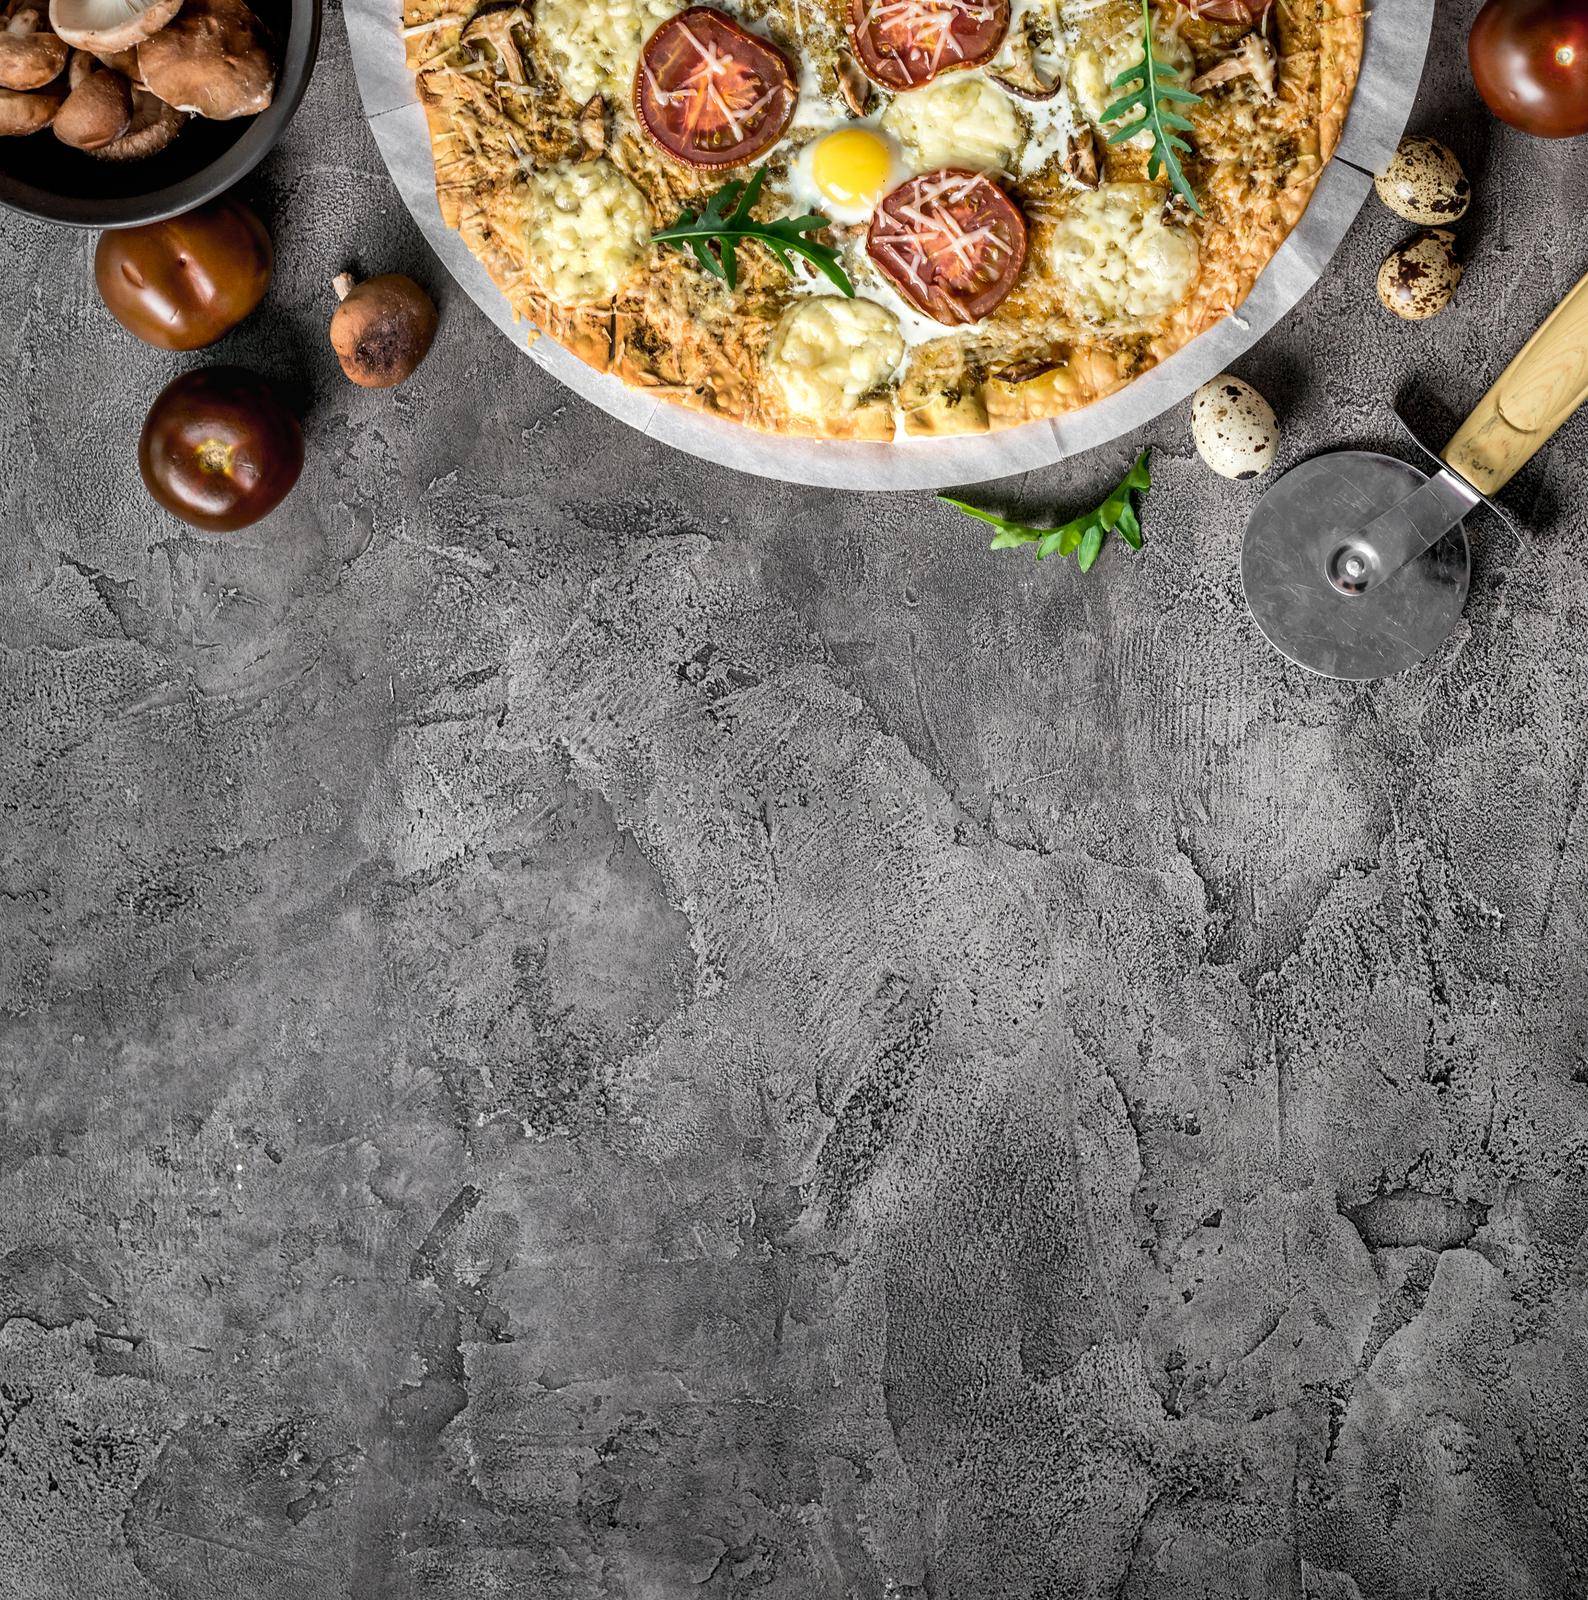 Homemade pizza with mushrooms and mozzarella decorated with arugula on a concrete background with food ingredients. space for text